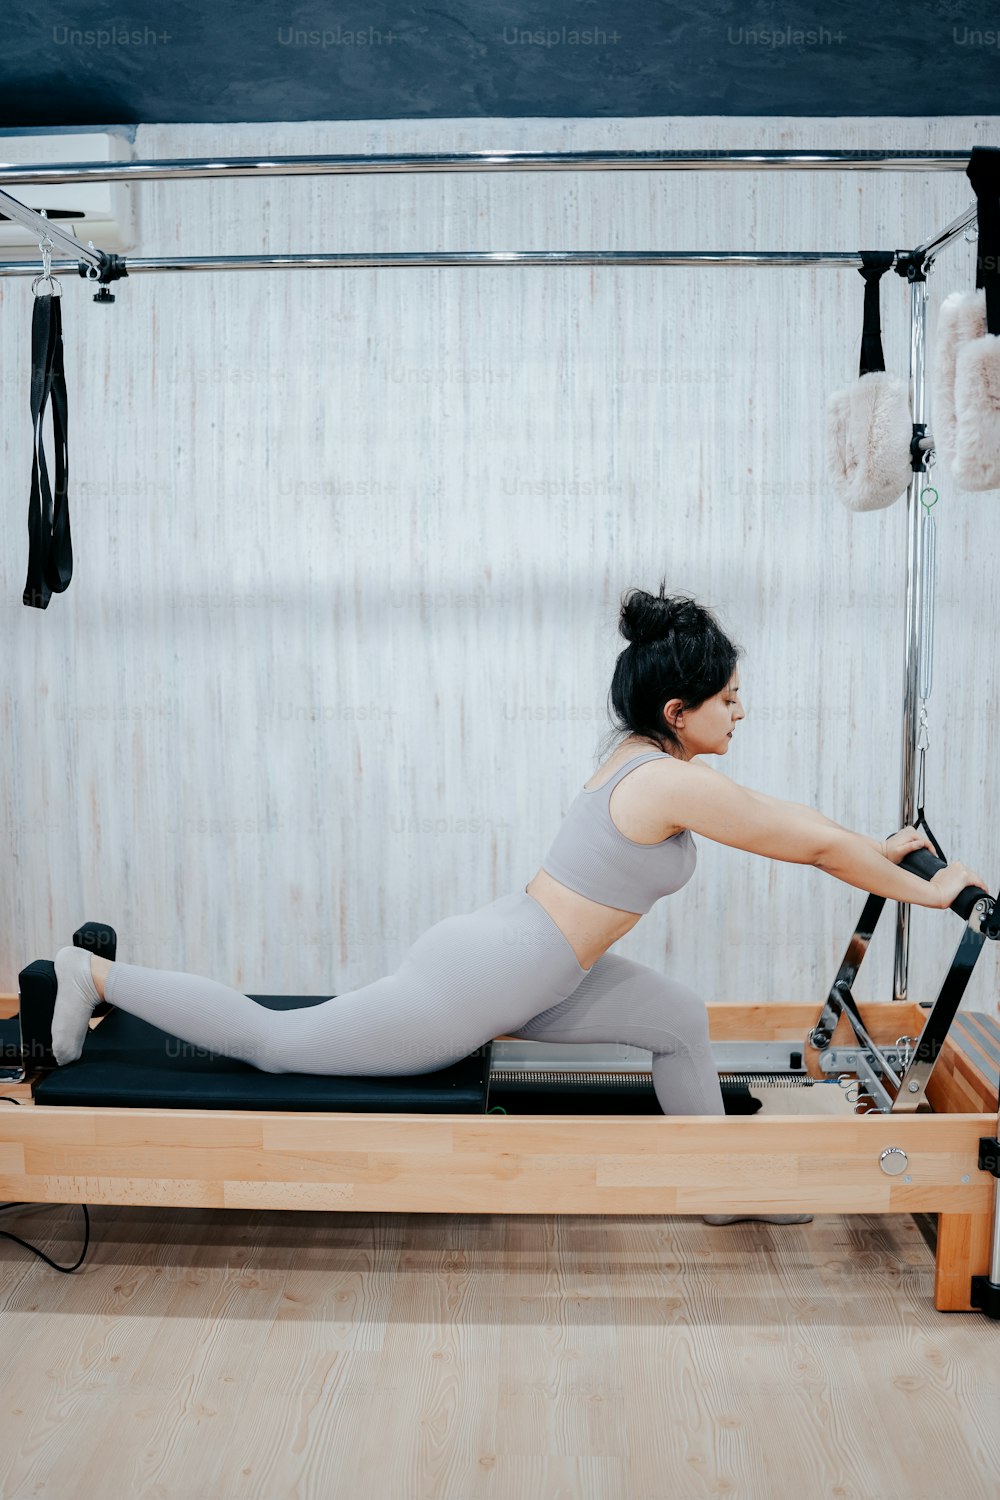 Workout Girl Pictures  Download Free Images on Unsplash